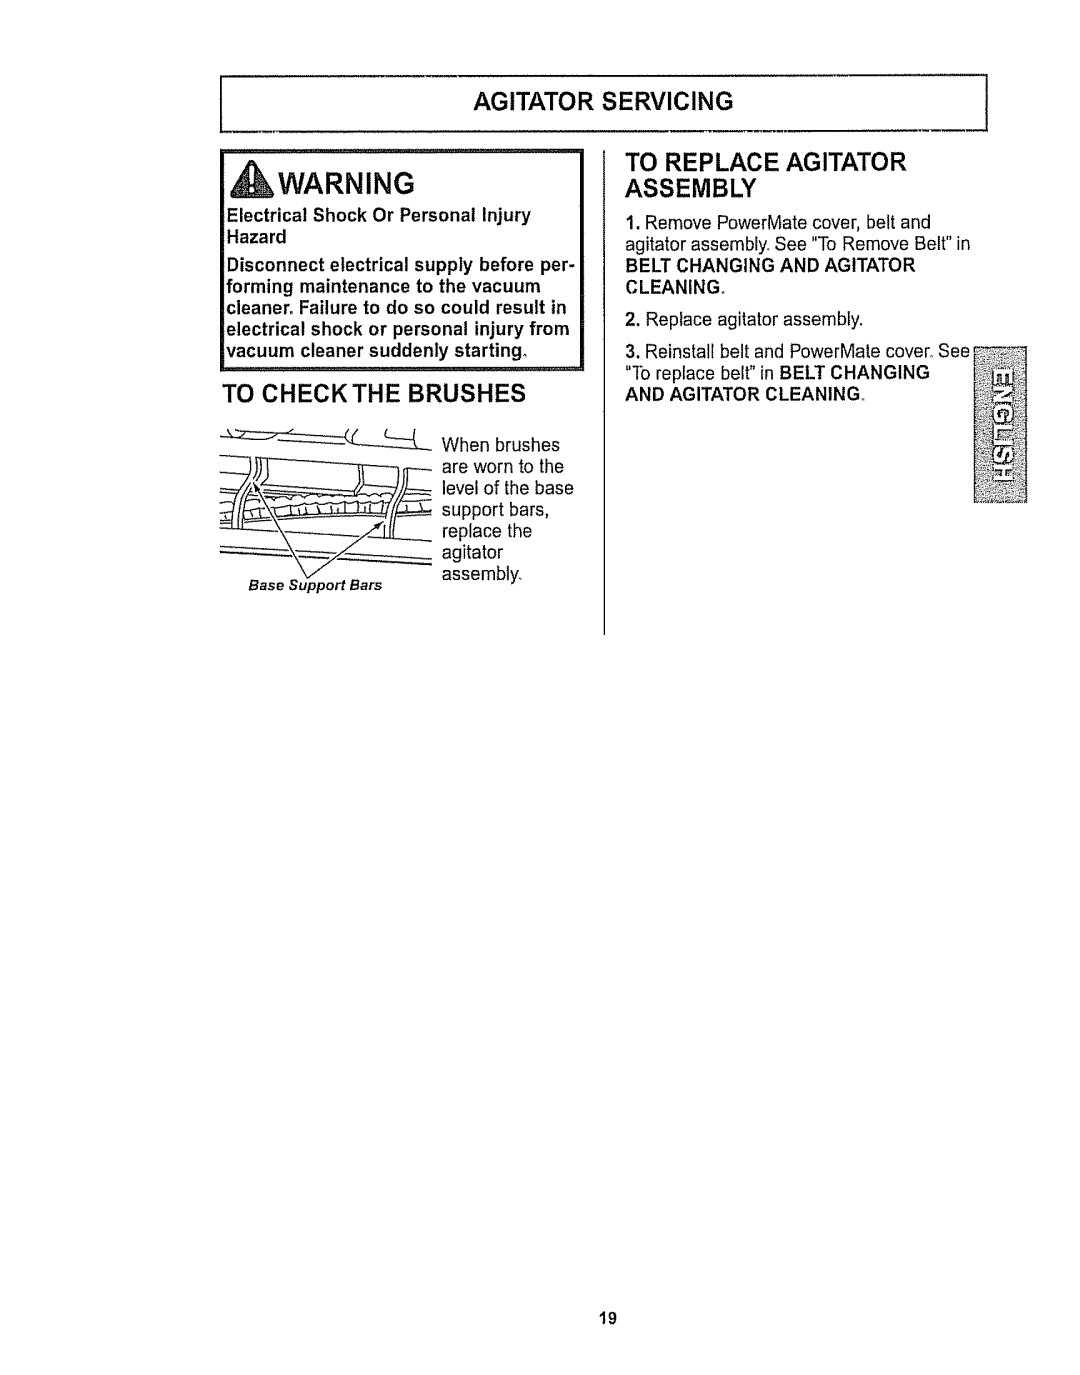 Kenmore 116.28615 owner manual _Warning, Servicingj To Replace Agitator Assembly, To Check The Brushes 